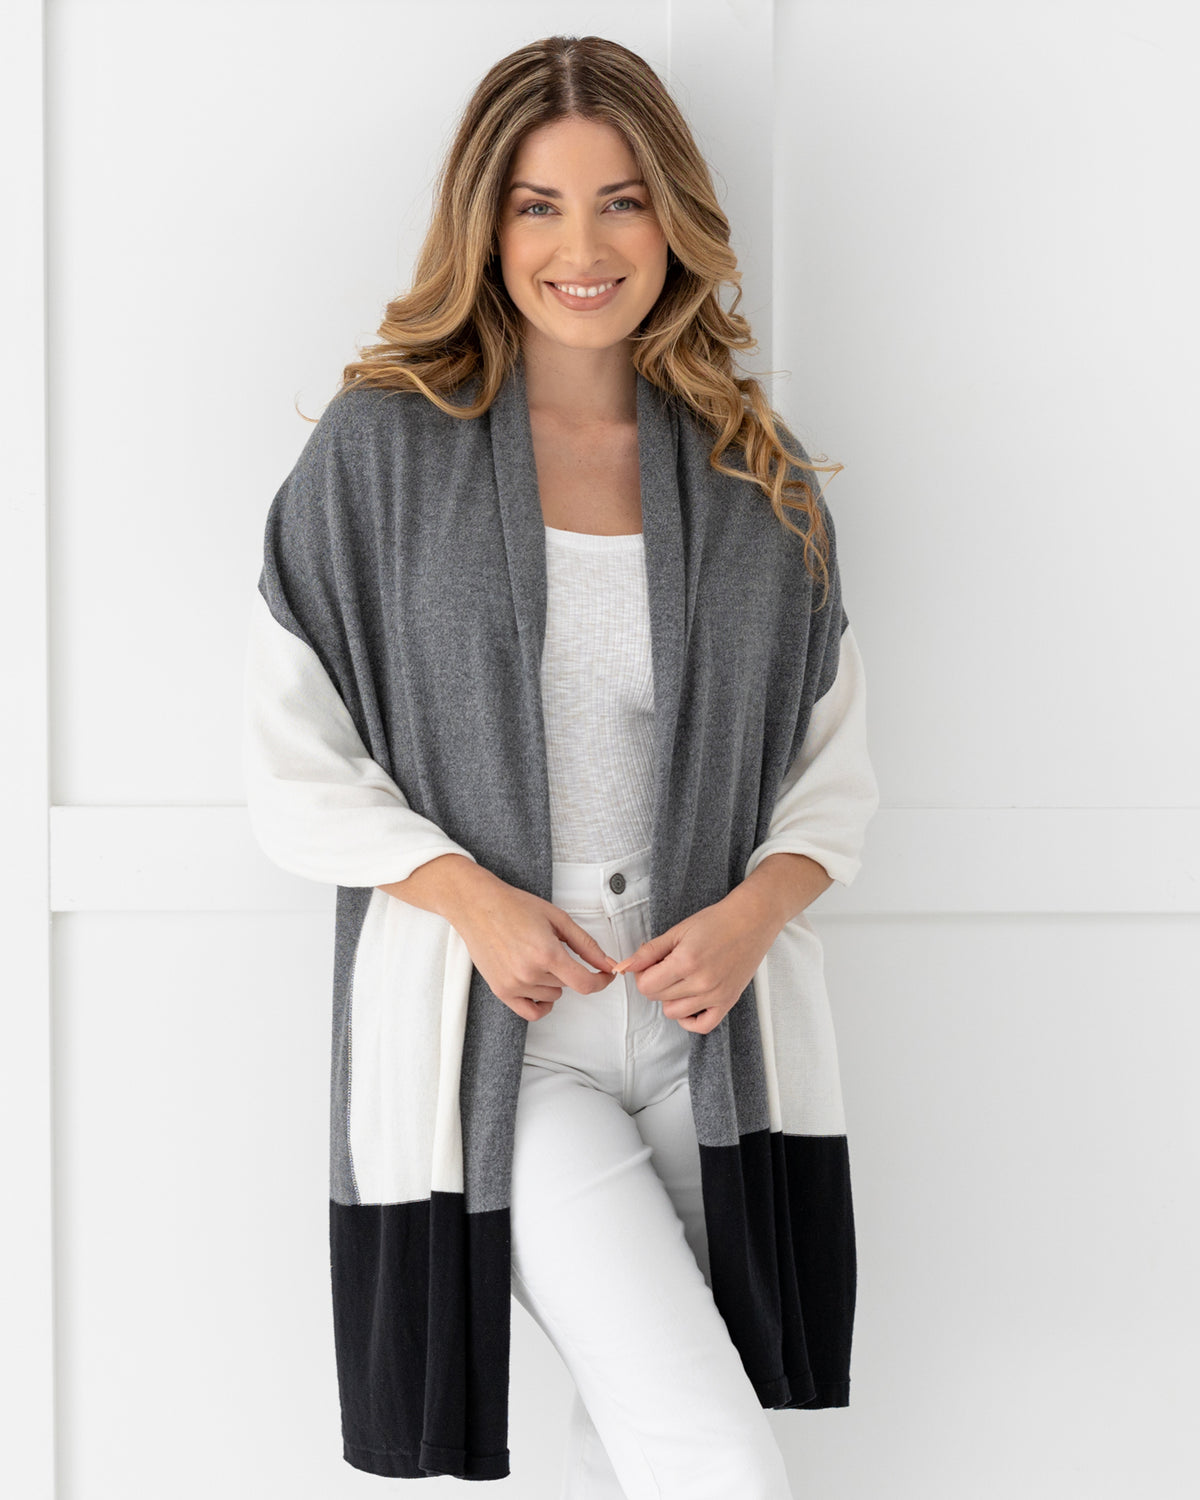 Woman wearing the Dreamsoft Travel Scarf in Gray Colorblock which is a black, gray and cream scarf, wearing as a shawl and smiling at camera